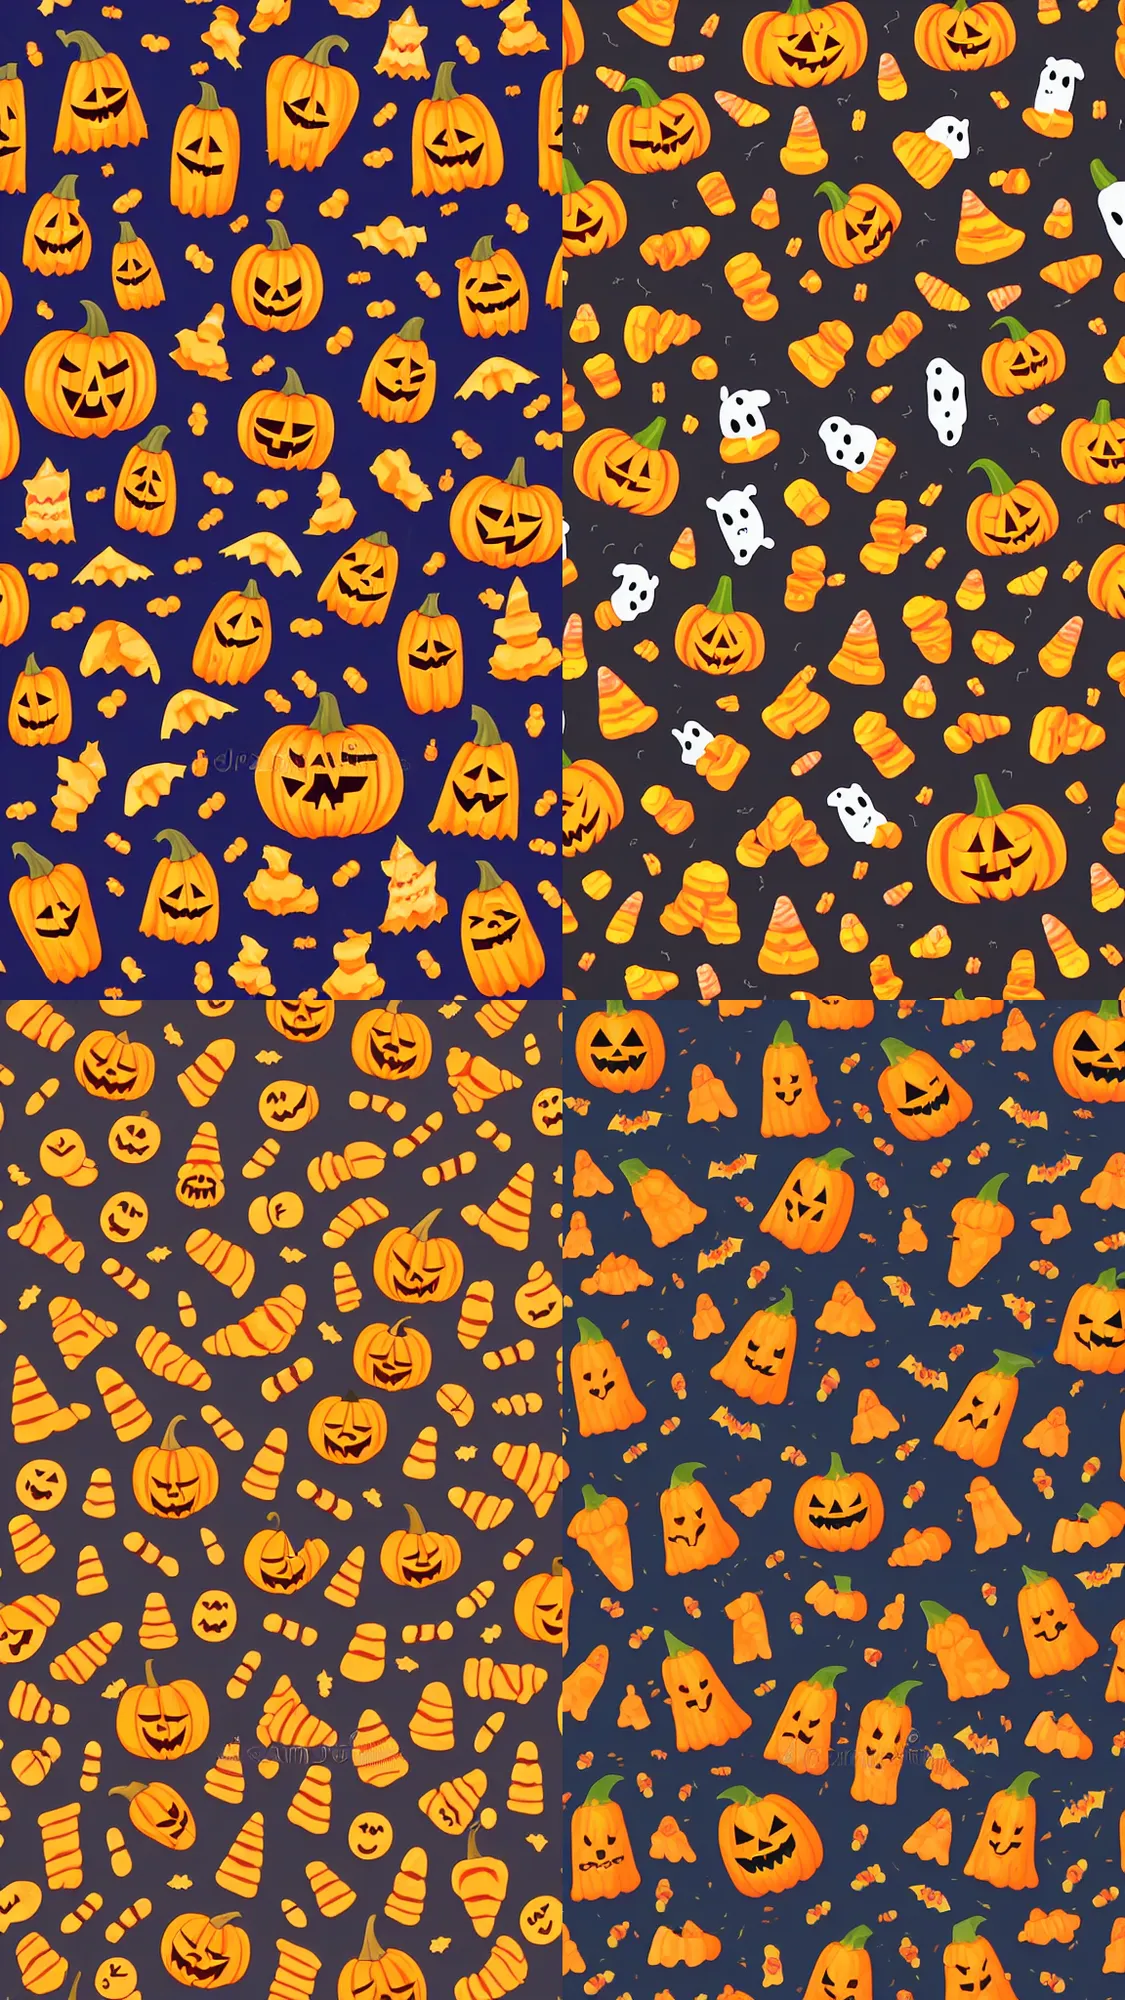 Prompt: Halloween wallpaper with ghosts, candy corn, jack-o-lanterns, 2D vector illustration pattern cartoon style